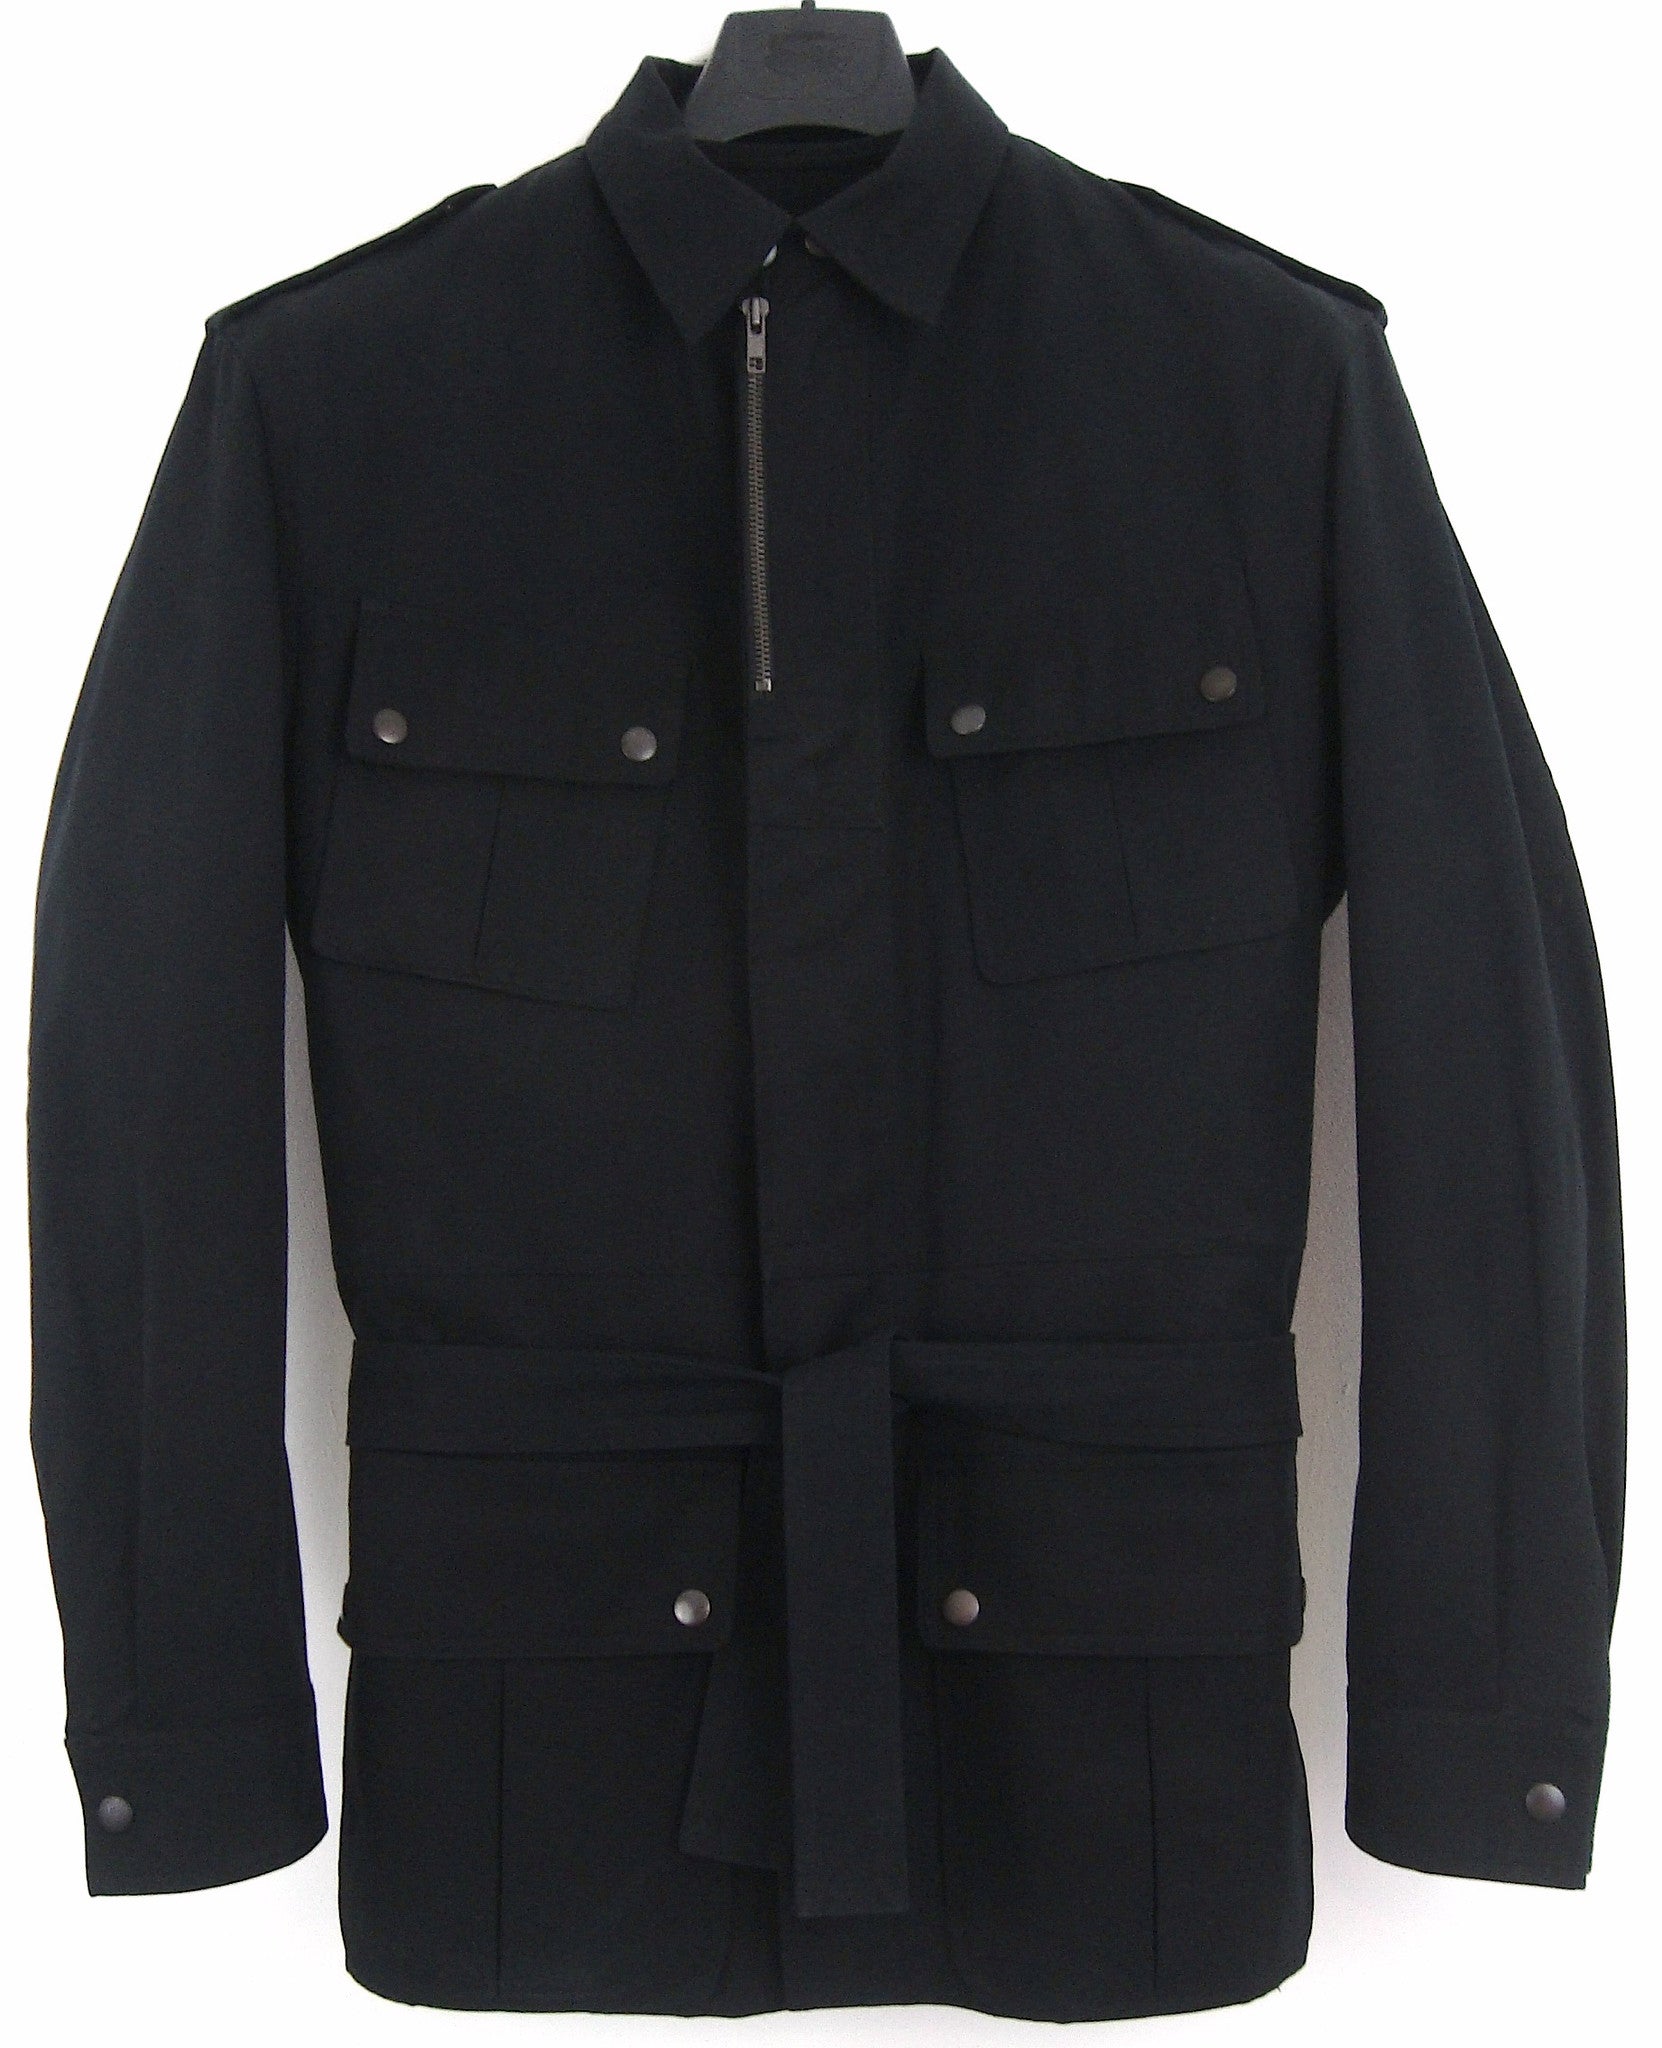 Raf Simons 2005 Broad-shouldered Military Jacket with